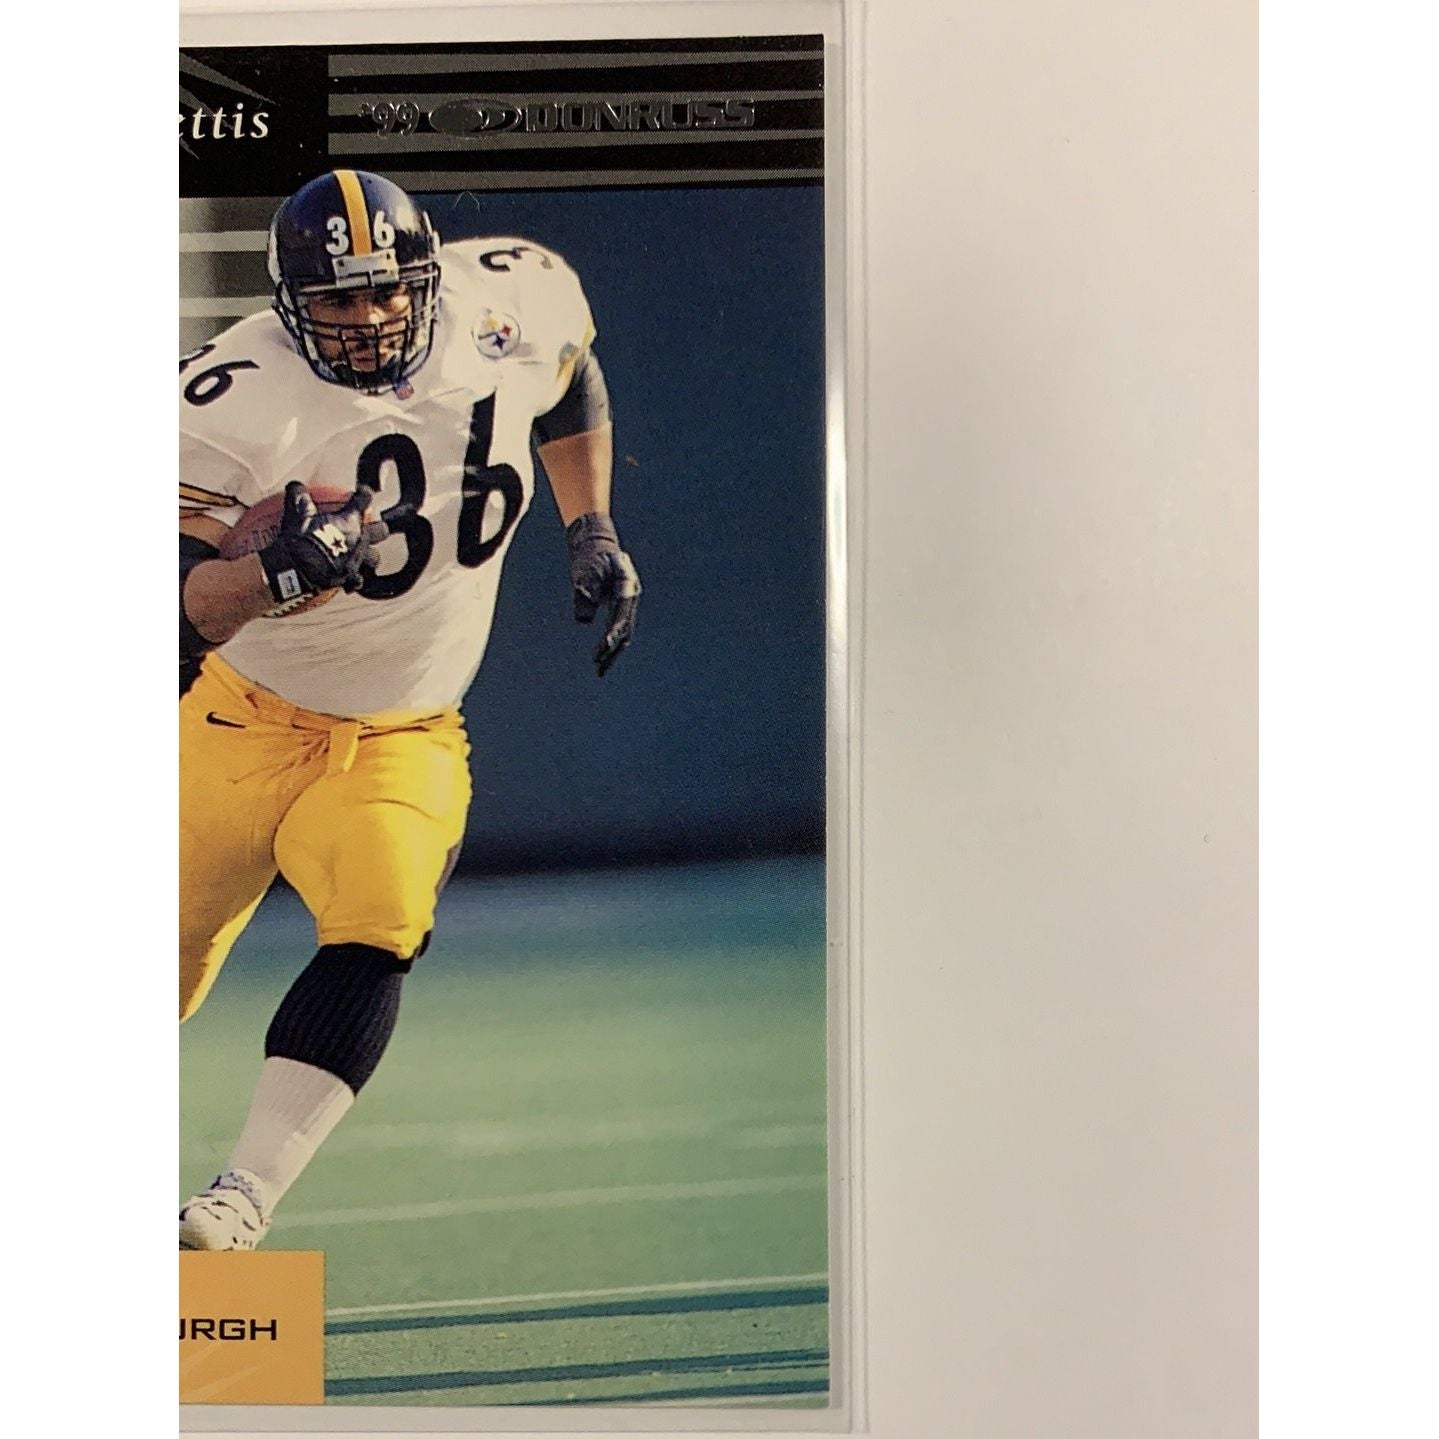  1999 Donruss Jerome “the bus” Bettis Base #102  Local Legends Cards & Collectibles